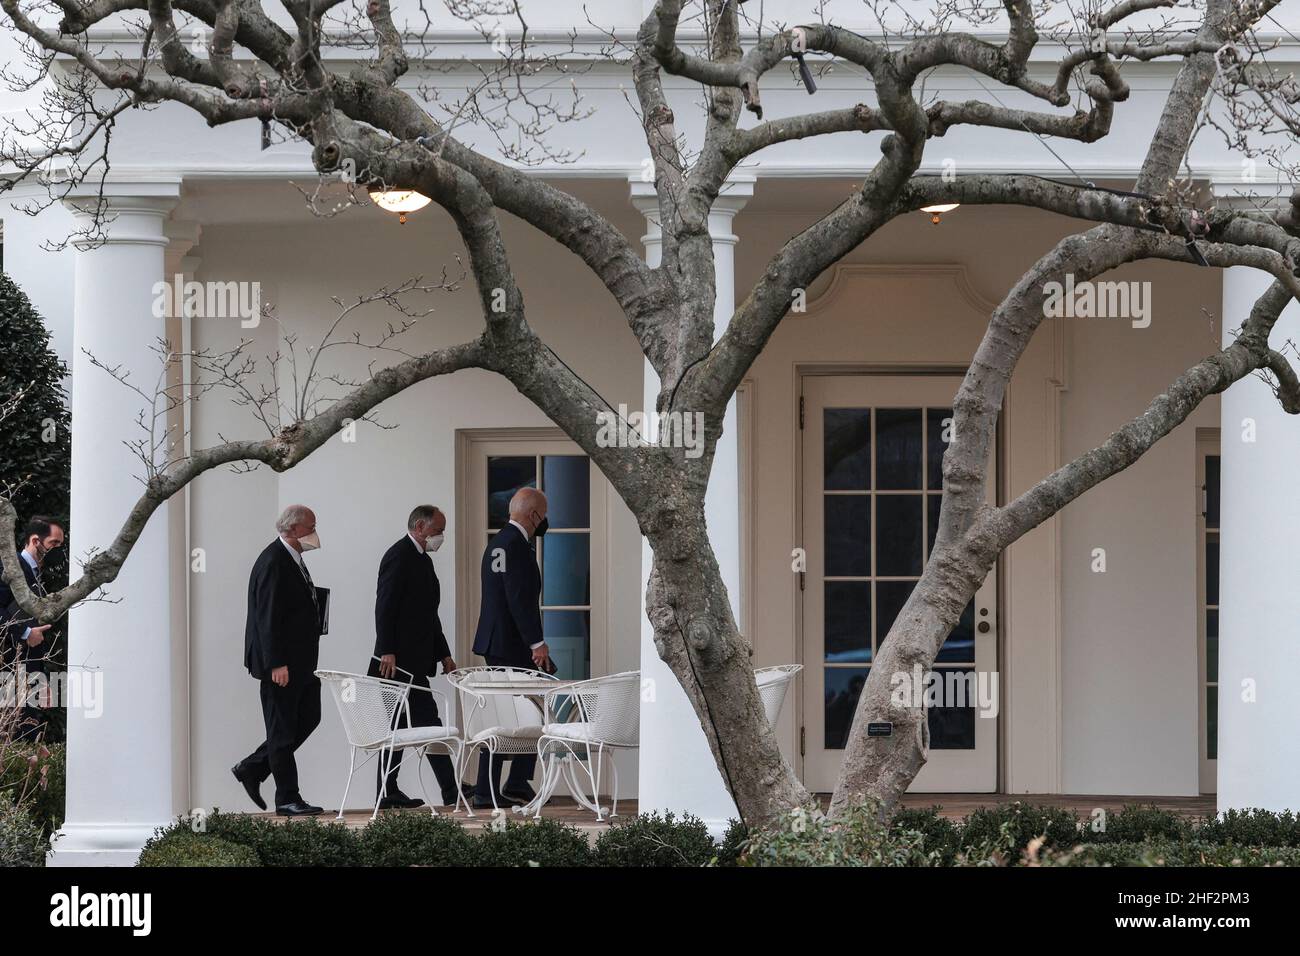 Washington, United States. 13th Jan, 2021. President Joe Biden walks with advisers Steve Ricchetti and Mike Donilon as he returns to the Oval Office of the White House after meeting with Senate Democrats at the US Capitol in Washington, DC on January 13, 2022. (Photo by Oliver Contreras/Pool/ABACAPRESS.COM) Credit: Abaca Press/Alamy Live News Stock Photo